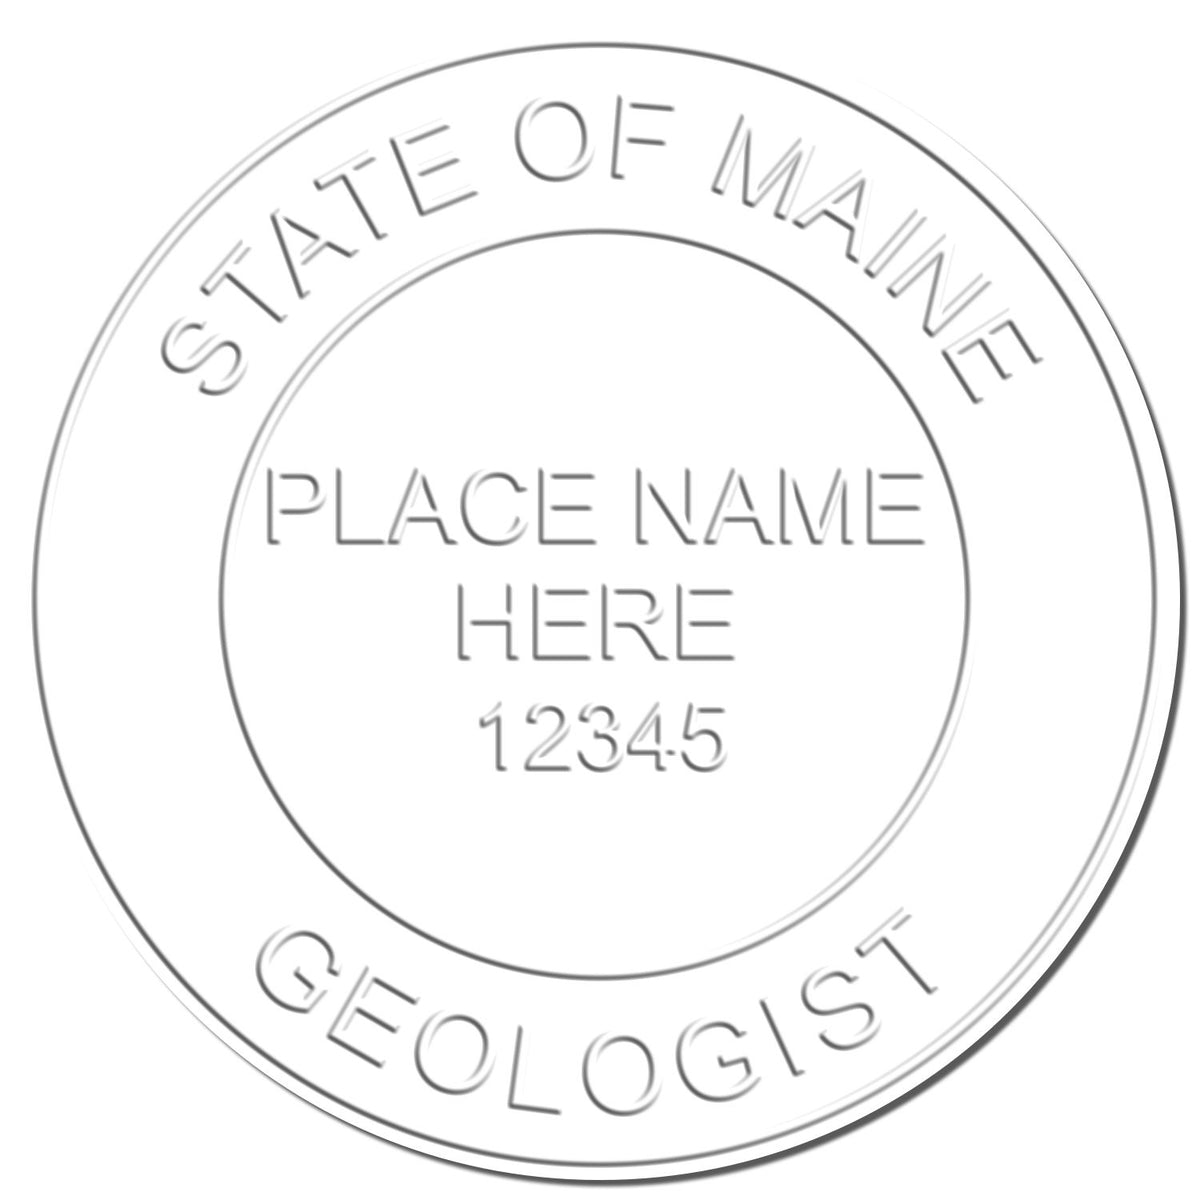 The Maine Geologist Desk Seal stamp impression comes to life with a crisp, detailed image stamped on paper - showcasing true professional quality.